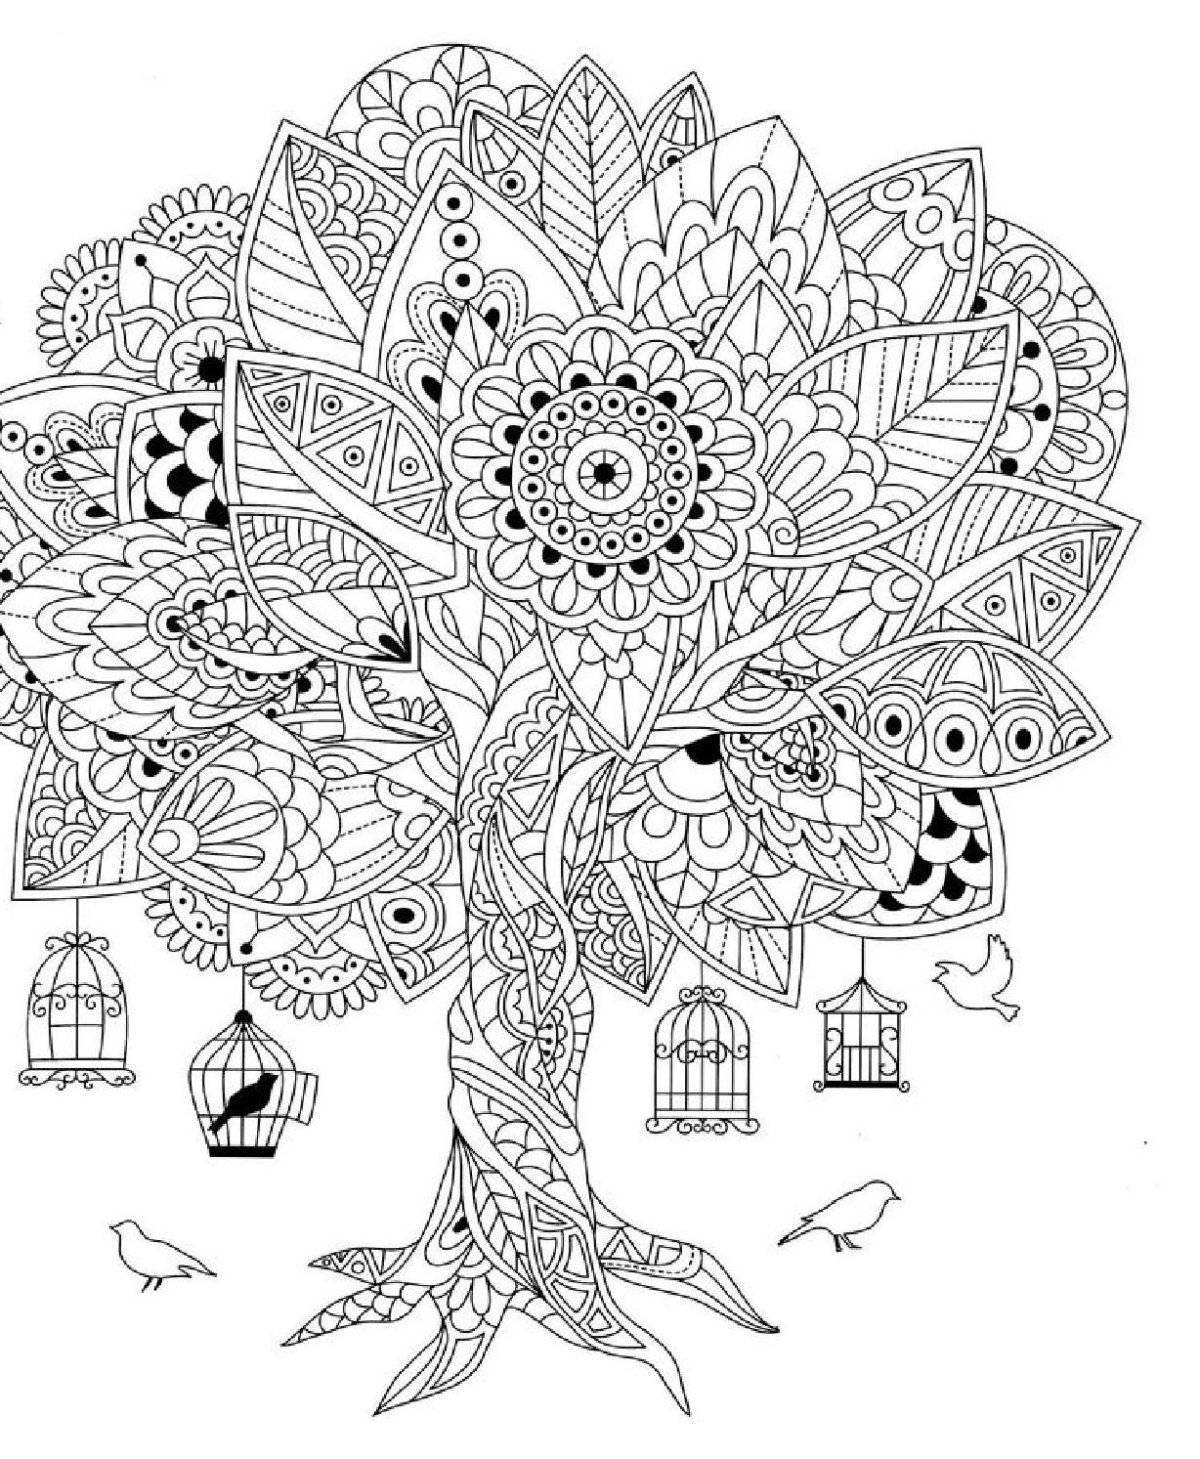 Relaxing psychological coloring book for adults